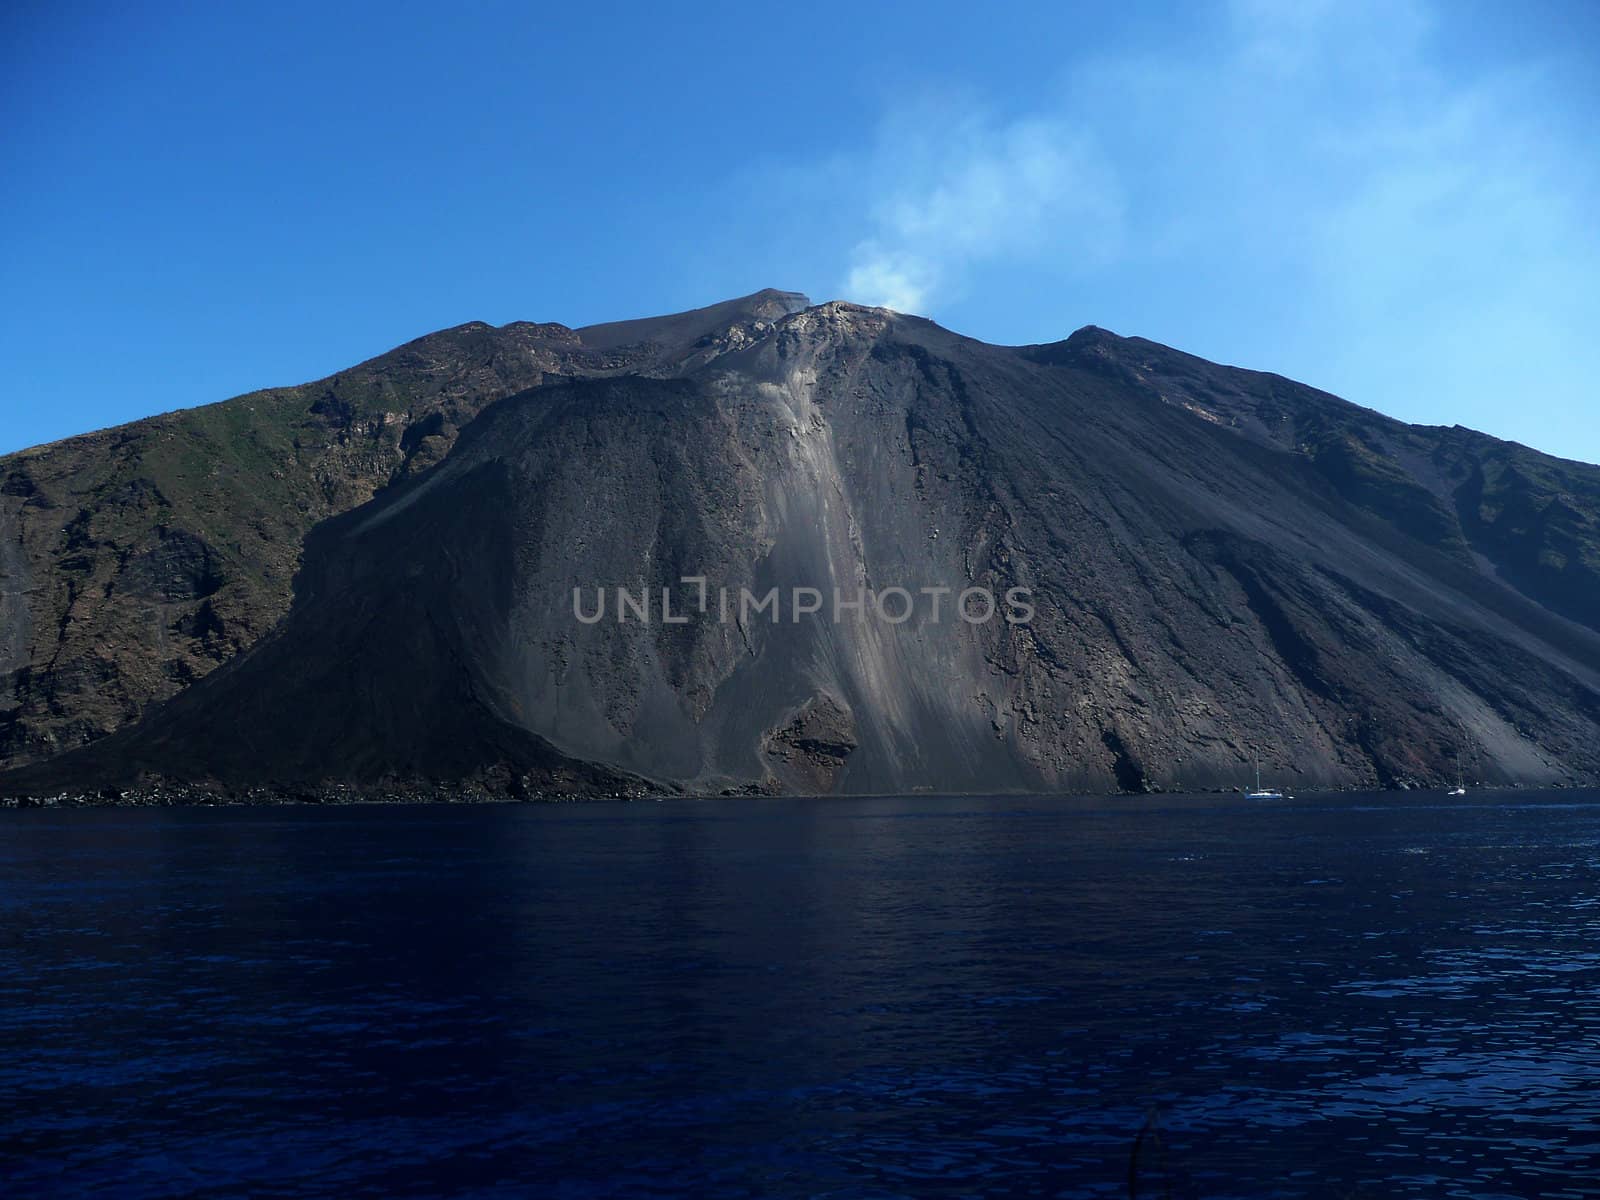 Stromboli, active volcano which is part of the Aeolian Islands Archipelago